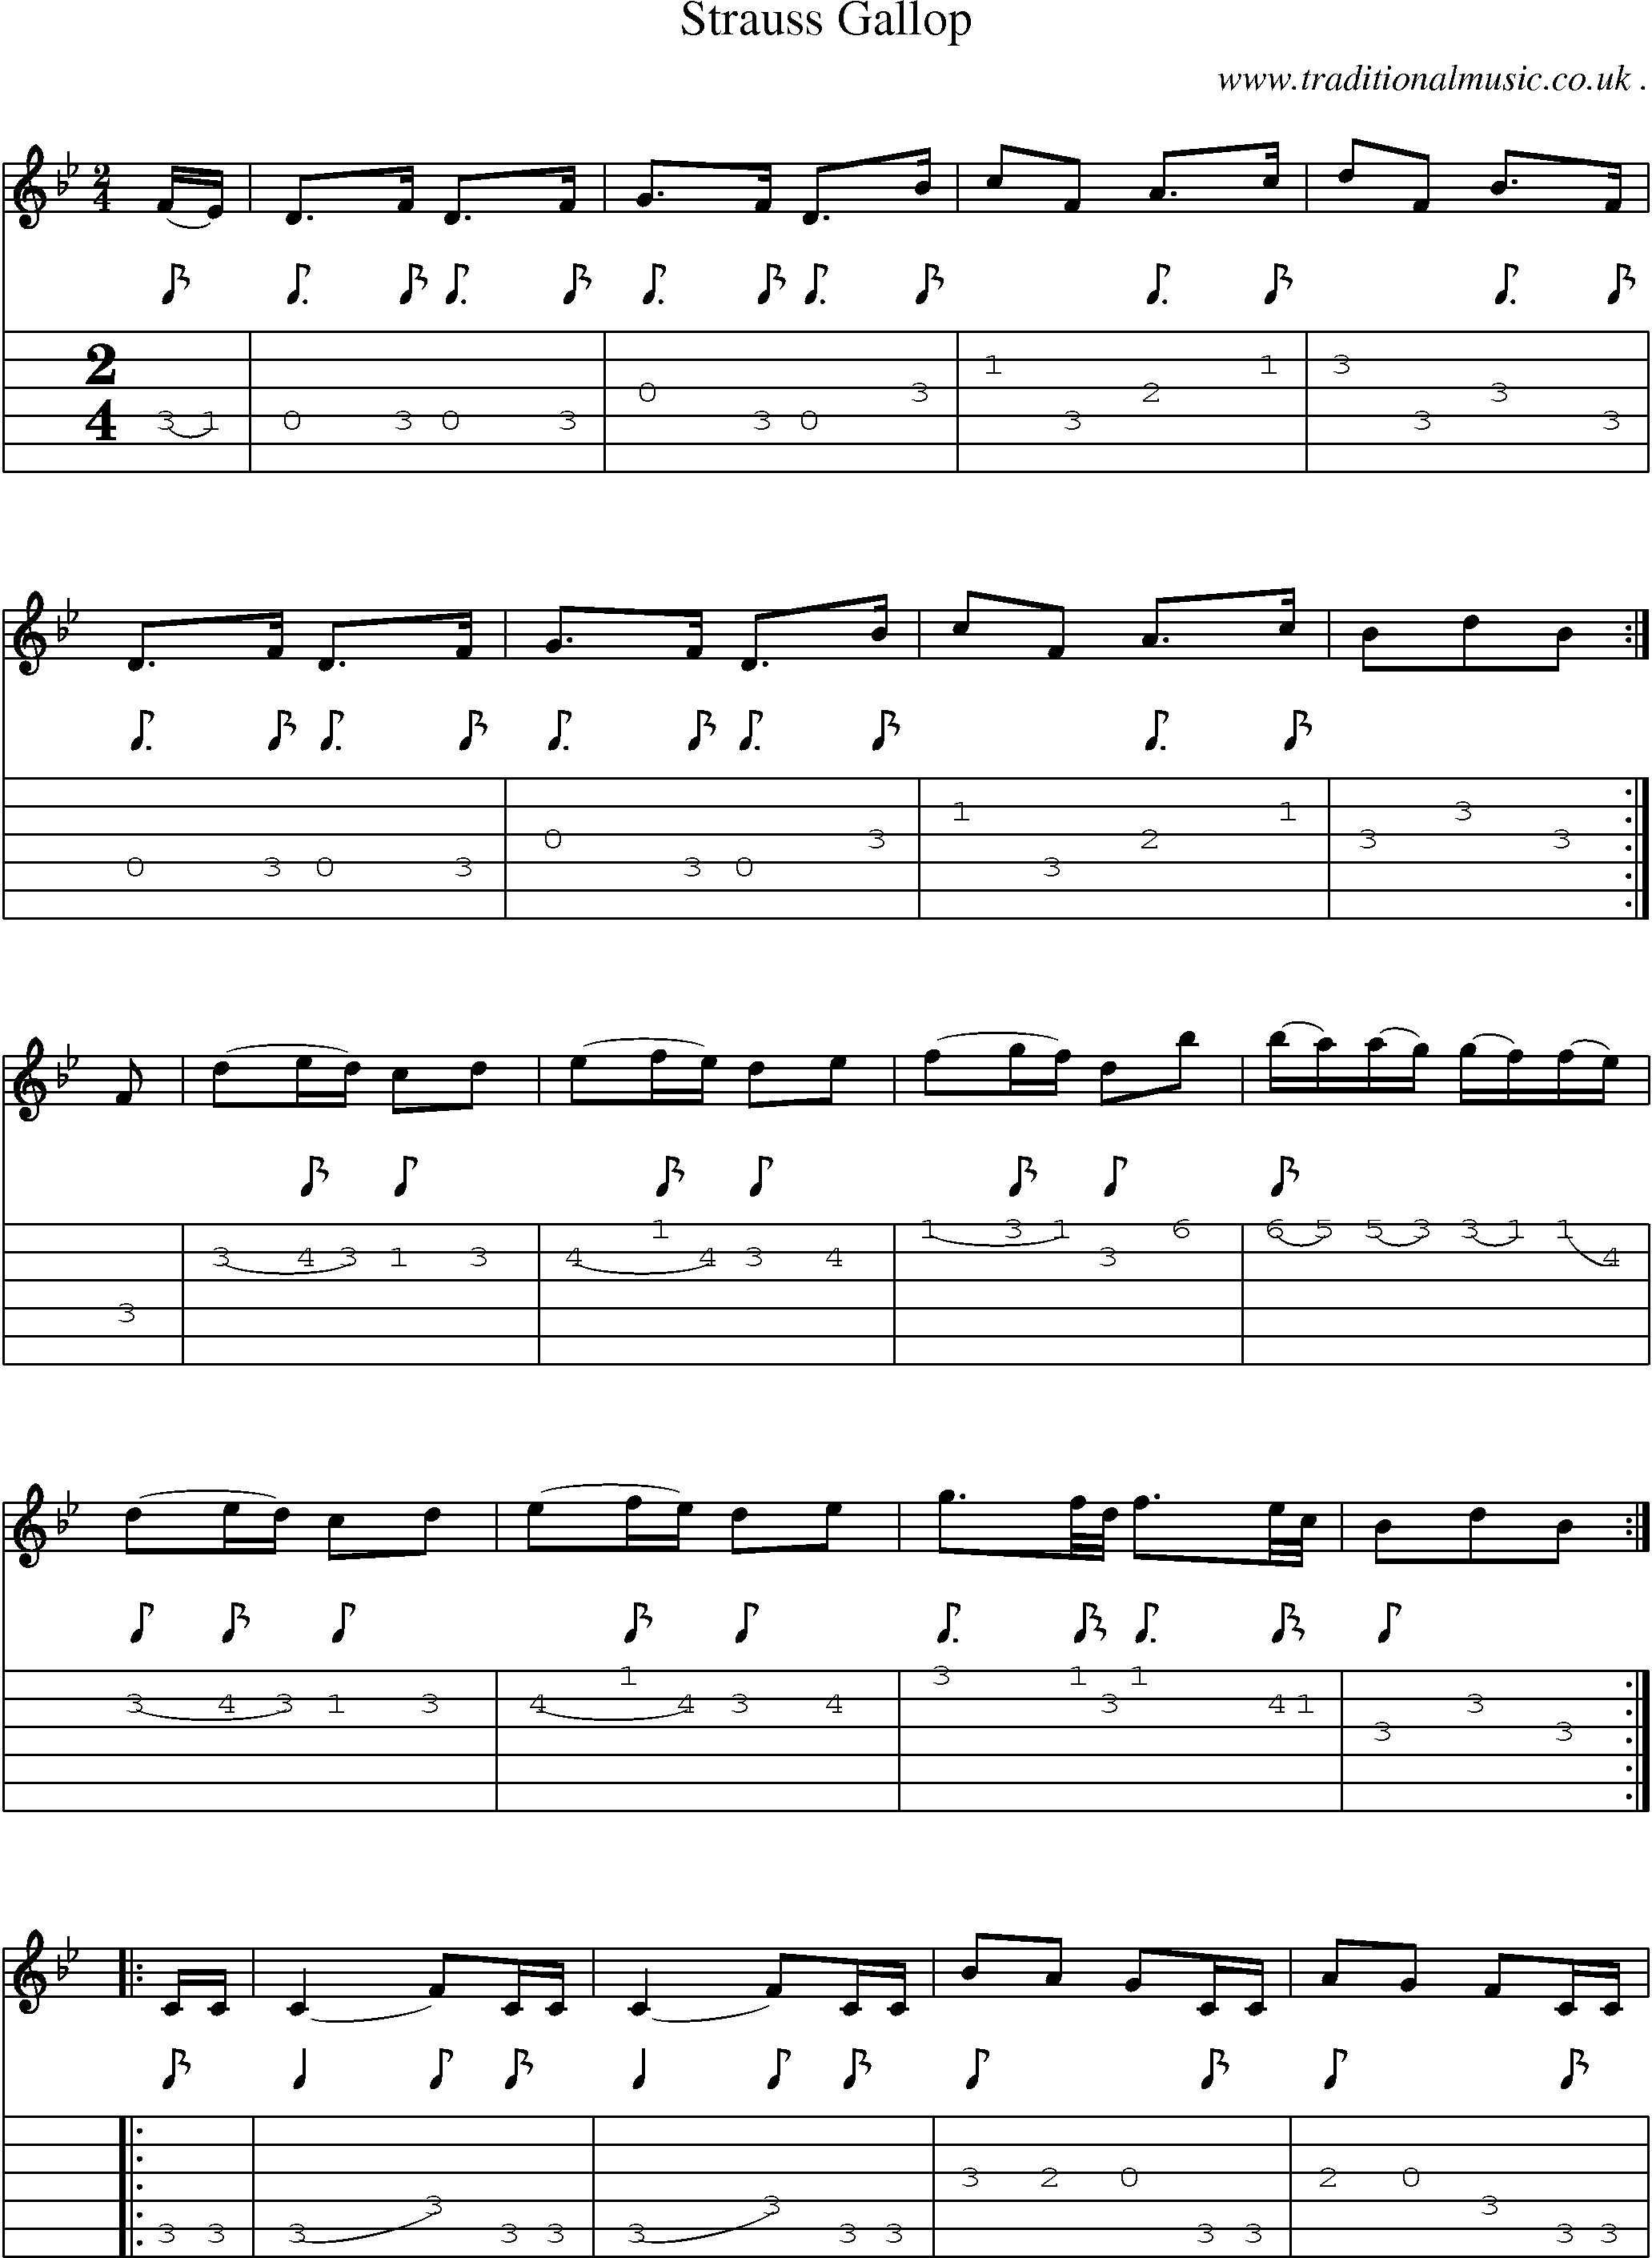 Sheet-Music and Guitar Tabs for Strauss Gallop